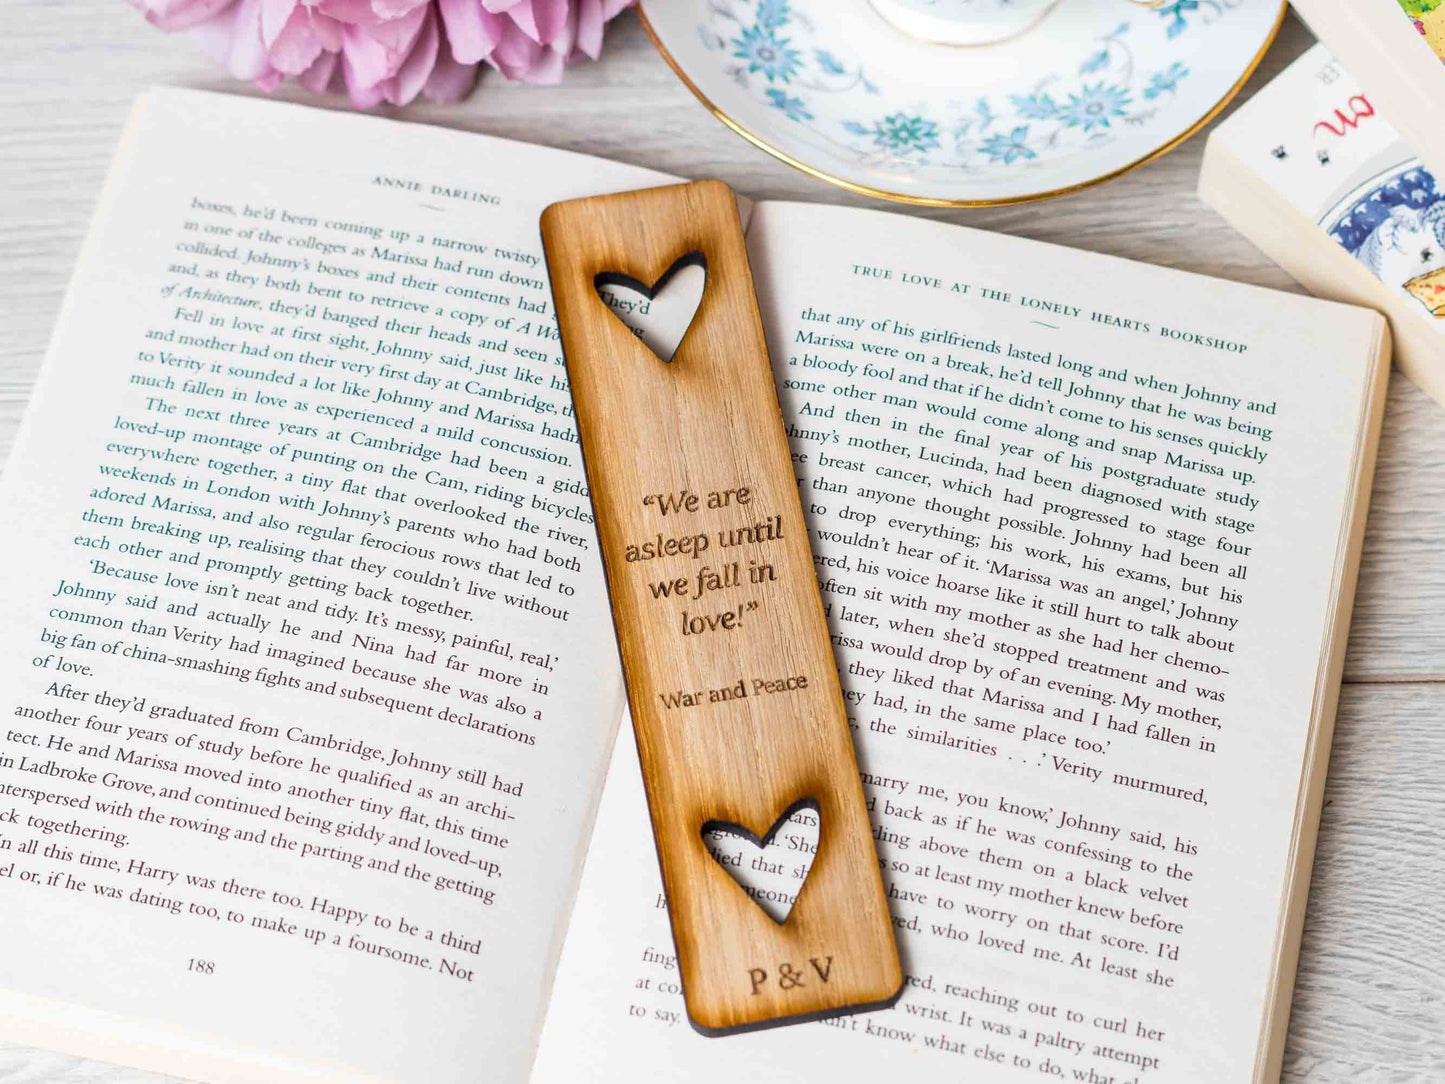 War and Peace quote on personalised bookmark